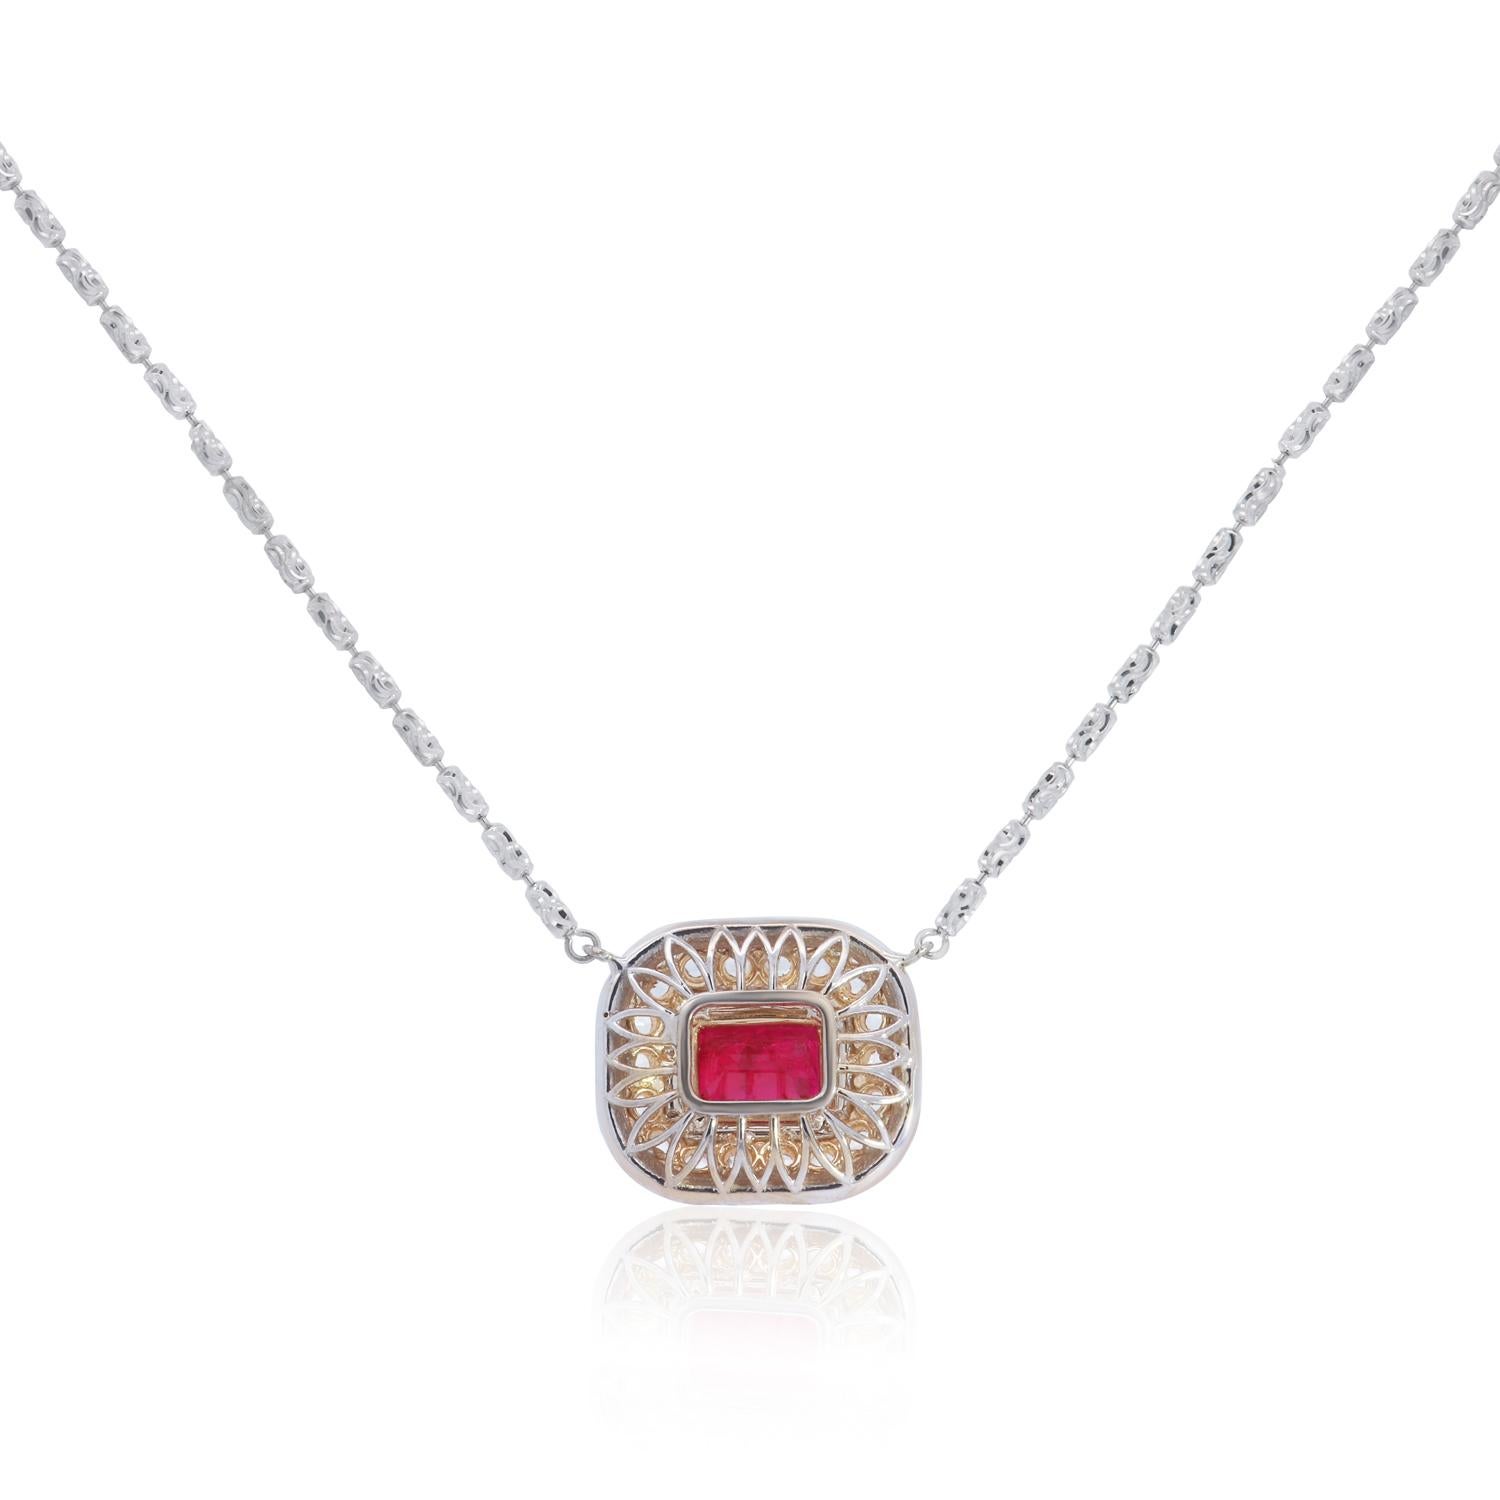 14K Two Tone Yellow and White Gold

1 Emerald Cut Ruby at approximately 2.47 Carats Total Weight - Measuring 8.7 x 7 millimeters

0.37 Carats Total Weight of Rose Cut Diamonds

0.50 Carats Total Weight of Round Brilliant White Diamonds

Color: H-I /